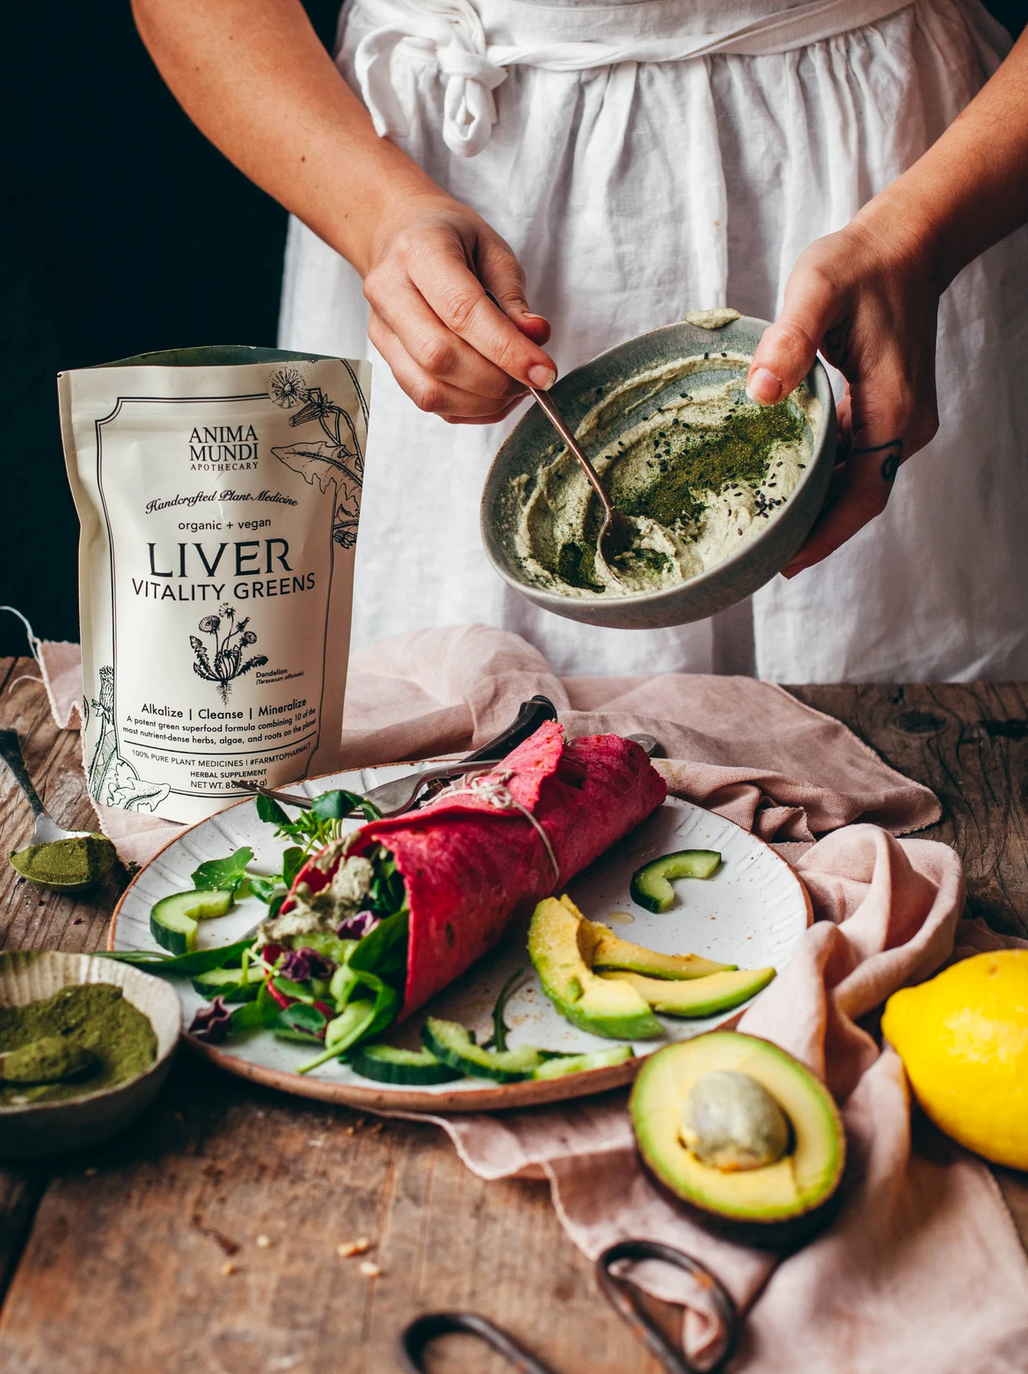 Liver Vitality: Daily Green Detox | Anima Mundi Herbals | Raw Living UK | Raw Foods | Anima Mundi&#39;s Liver Vitality Greens is a Daily Green Detox Cleansing formula packed with nutrients to kickstart your body and Detox your Liver &amp; Gall Bladder.